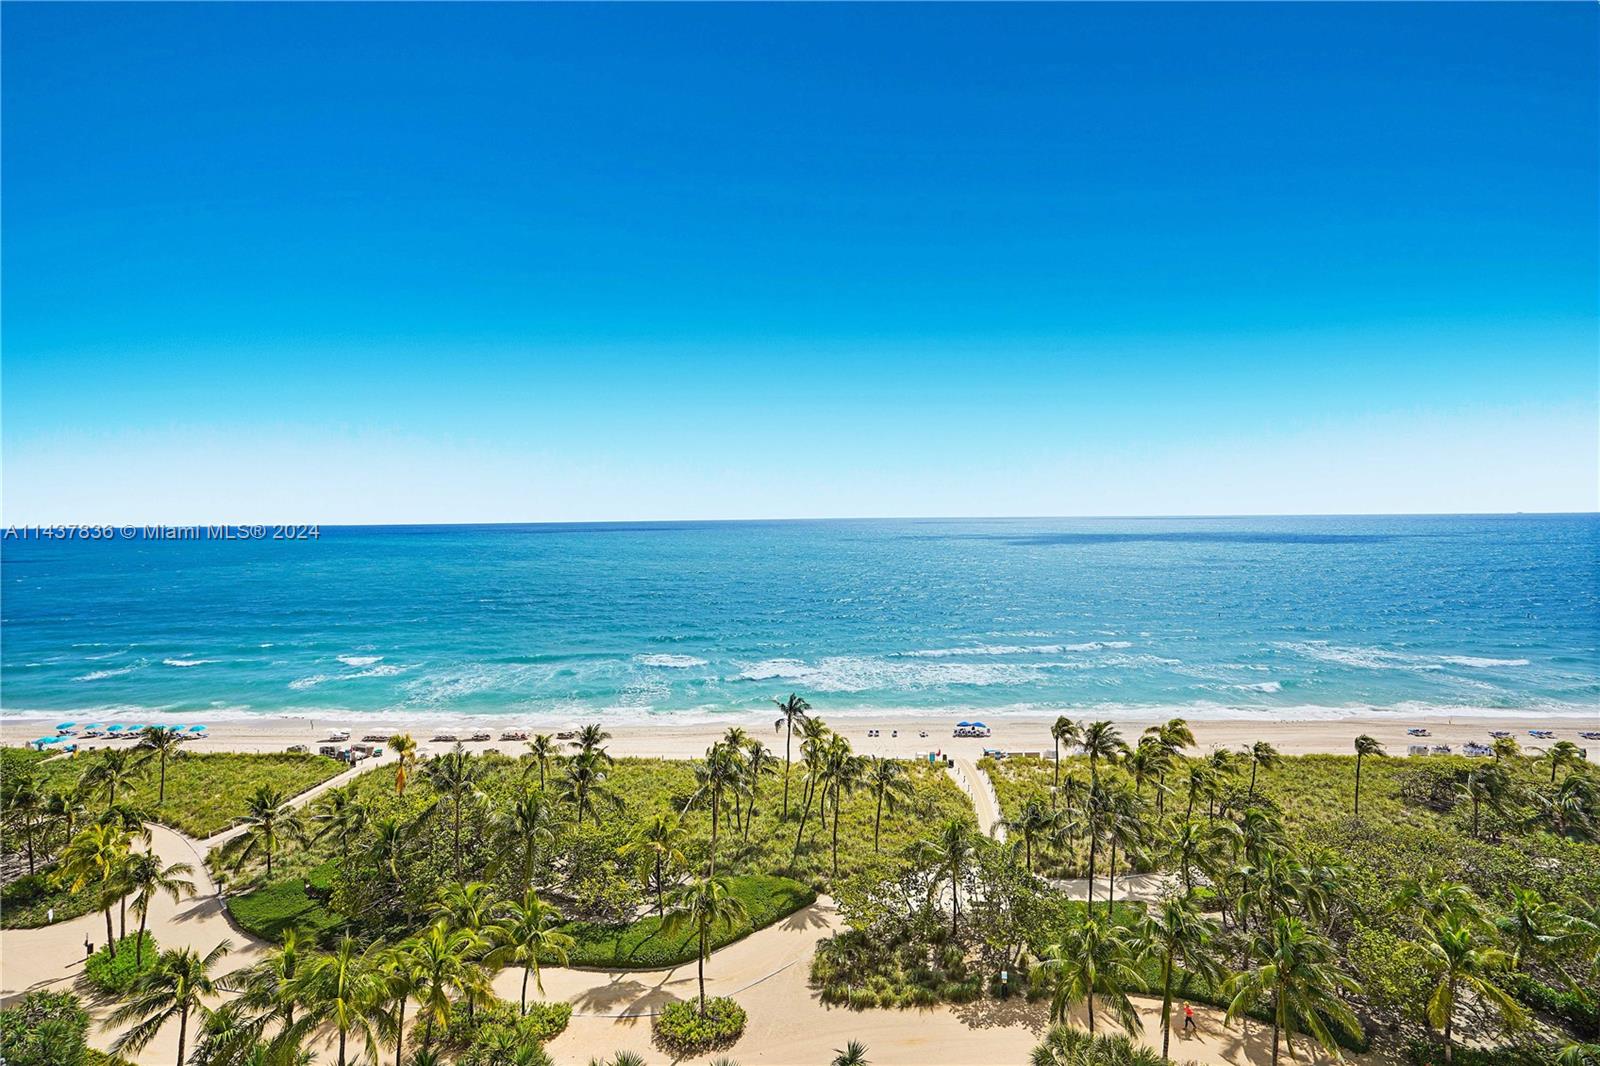 This spectacular, direct oceanfront condo is renovated, fully furnished/turnkey and ready for move in. Included in the sale is poolside Cabana #2. This stunning masterpiece offers a re-designed 3300 Sq. Ft. floor plan, breathtaking direct ocean views, 4BD/3.5BA and an oceanfront den/office with a sofa bed, large entertainment bar, Italian porcelain floors throughout, open kitchen, large master suite, many closets, new impact windows/doors, large wrap-around terrace & laundry room. Tastefully decorated with furnishings by Artefacto and Anima Domus. Bal Harbour 101 is a prestigious full-service, remodeled building with a restaurant, gym, pool & 8 hotel rooms only available for owner’s guests. Click the virtual tour link to see video.